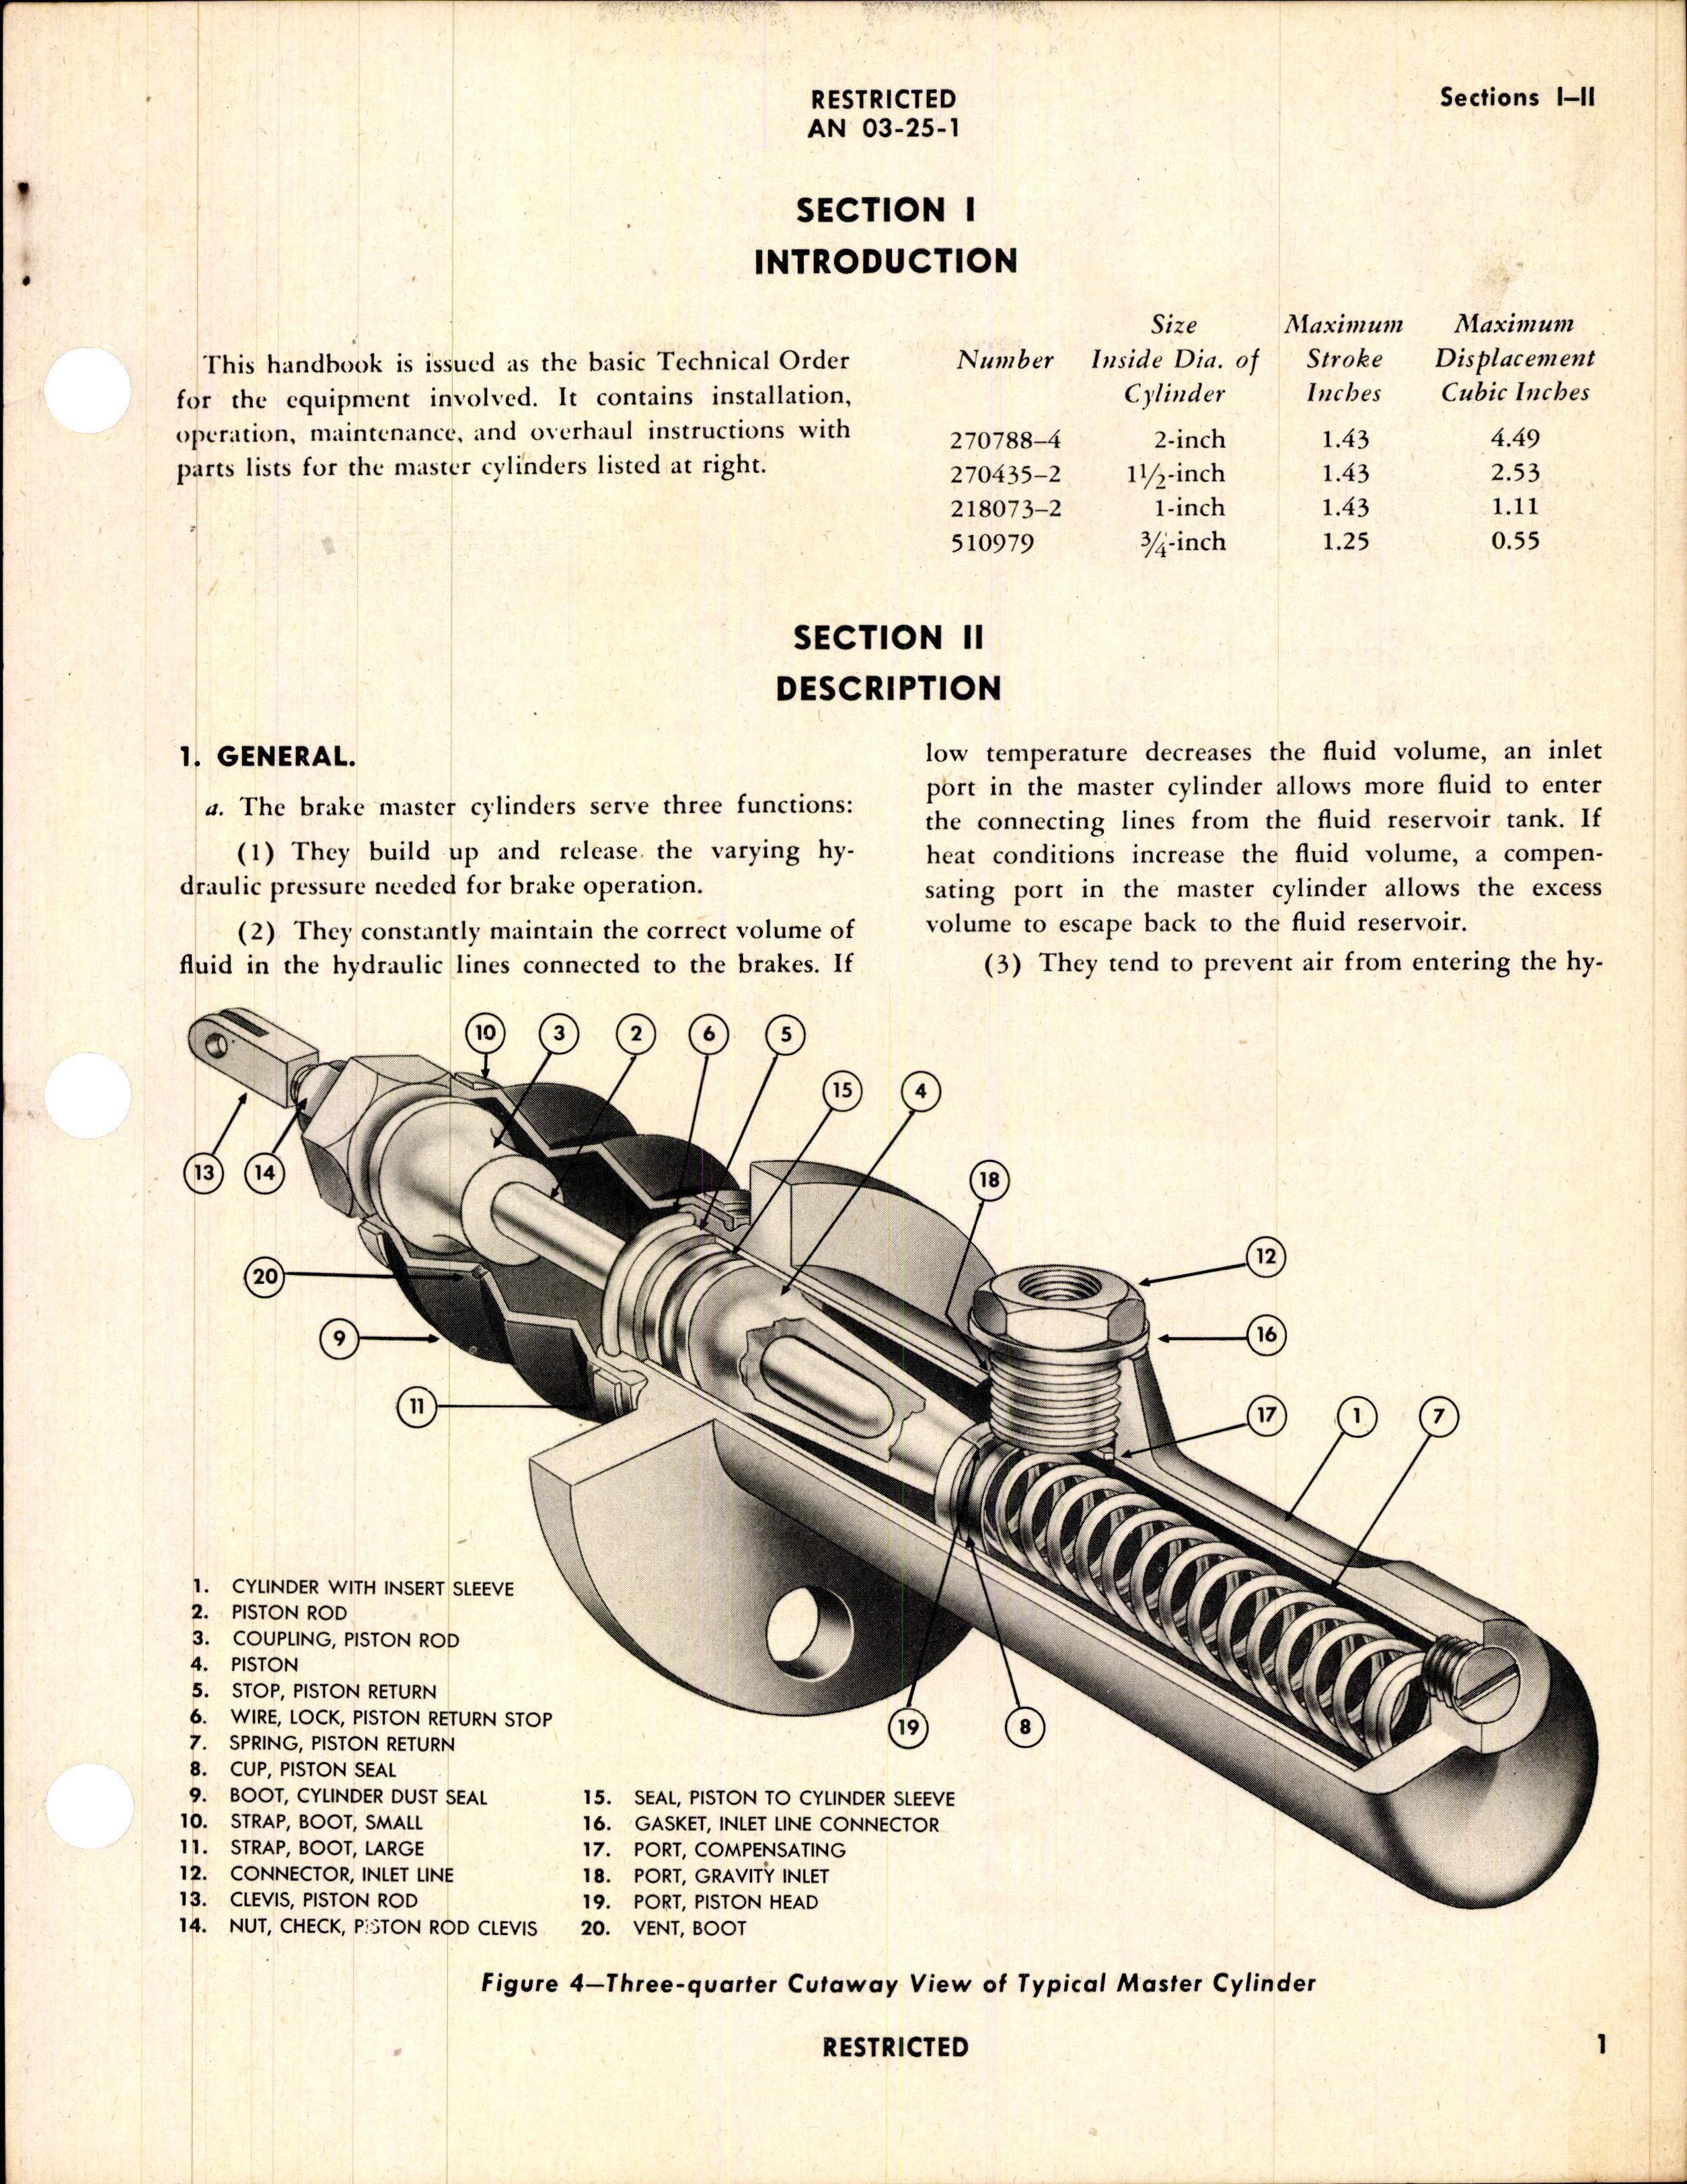 Sample page 5 from AirCorps Library document: Handbook of Instructions with Parts Catalog for Goodyear Master Brake Cylinders